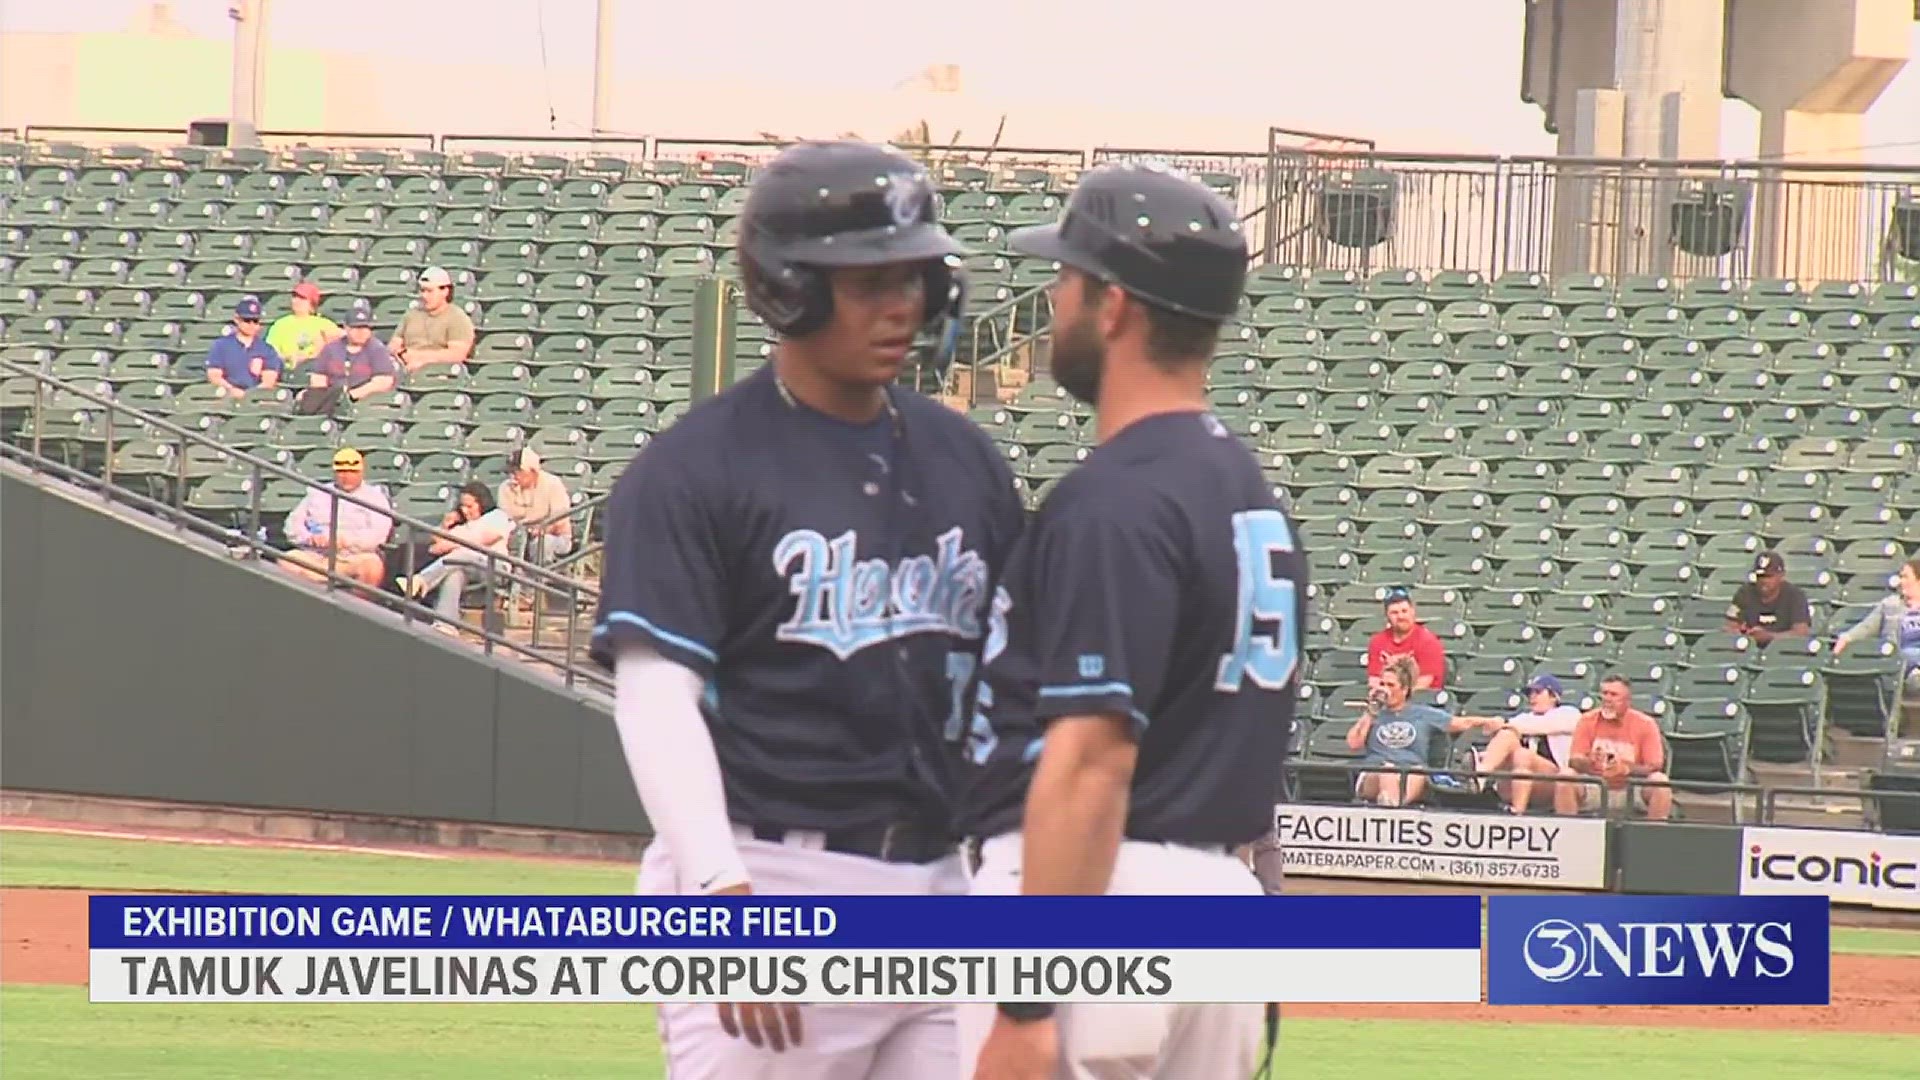 The Hooks now turn their sights to Opening Day later this week while the Javelinas return to conference play.